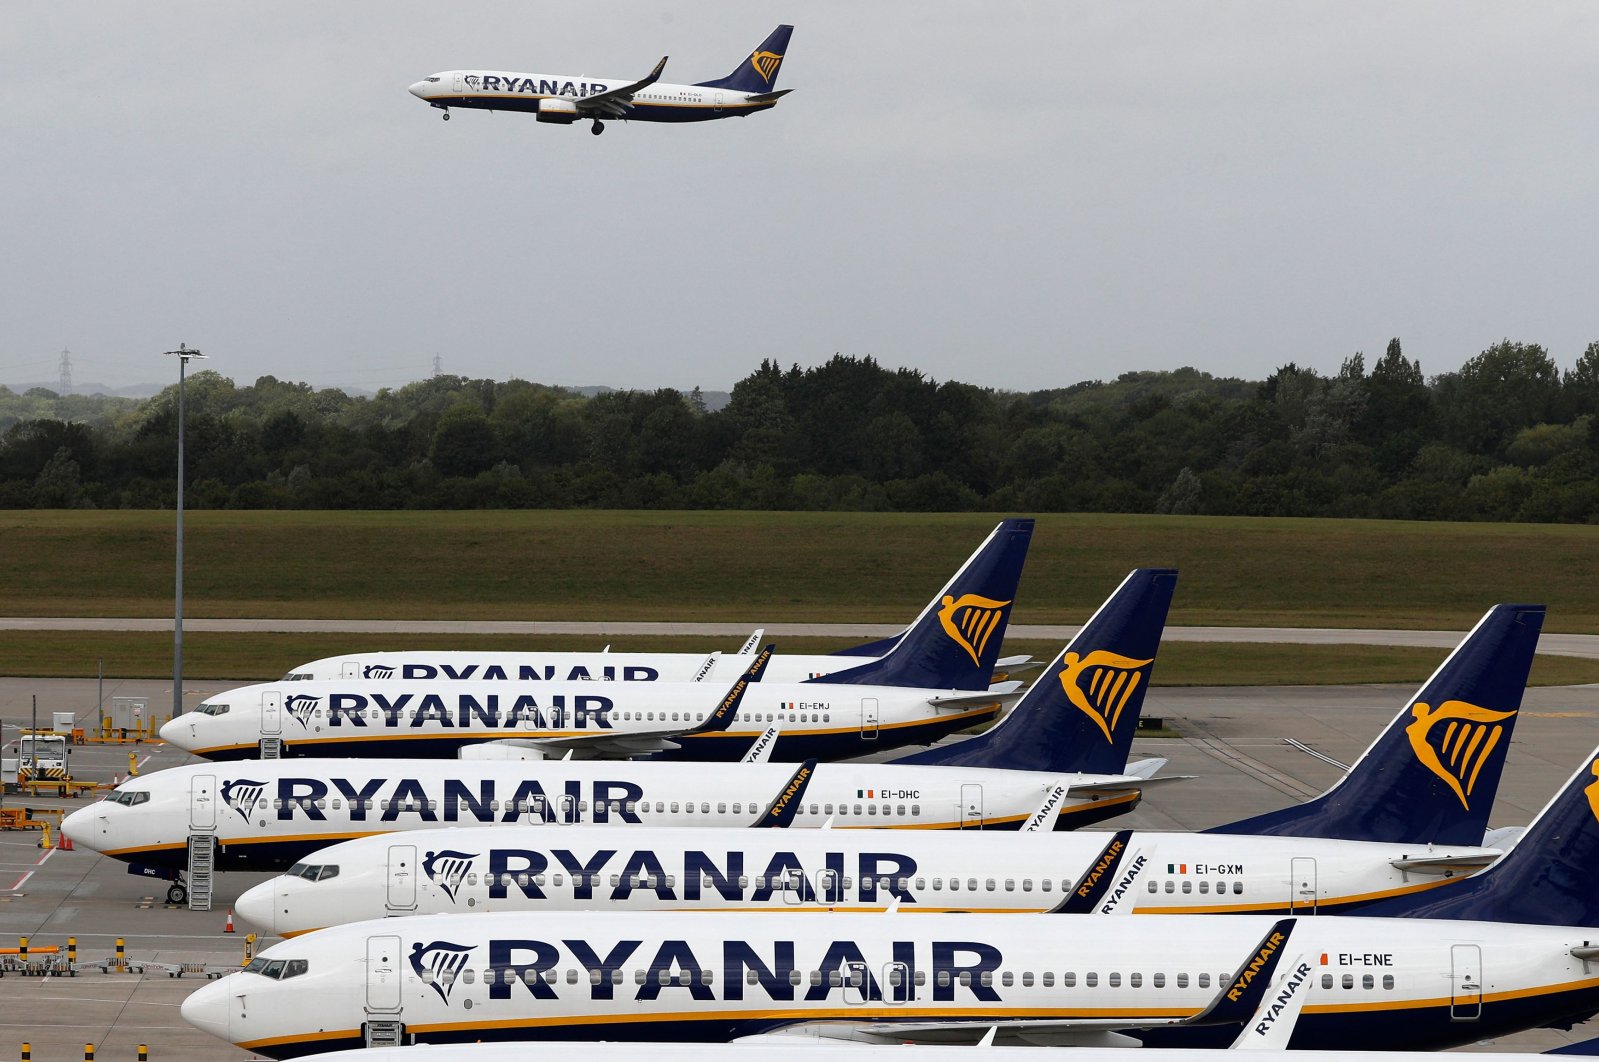 Ryanair aircraft are pictured at Stansted airport, northeast of London, U.K., Aug. 20, 2020. (AFP Photo)